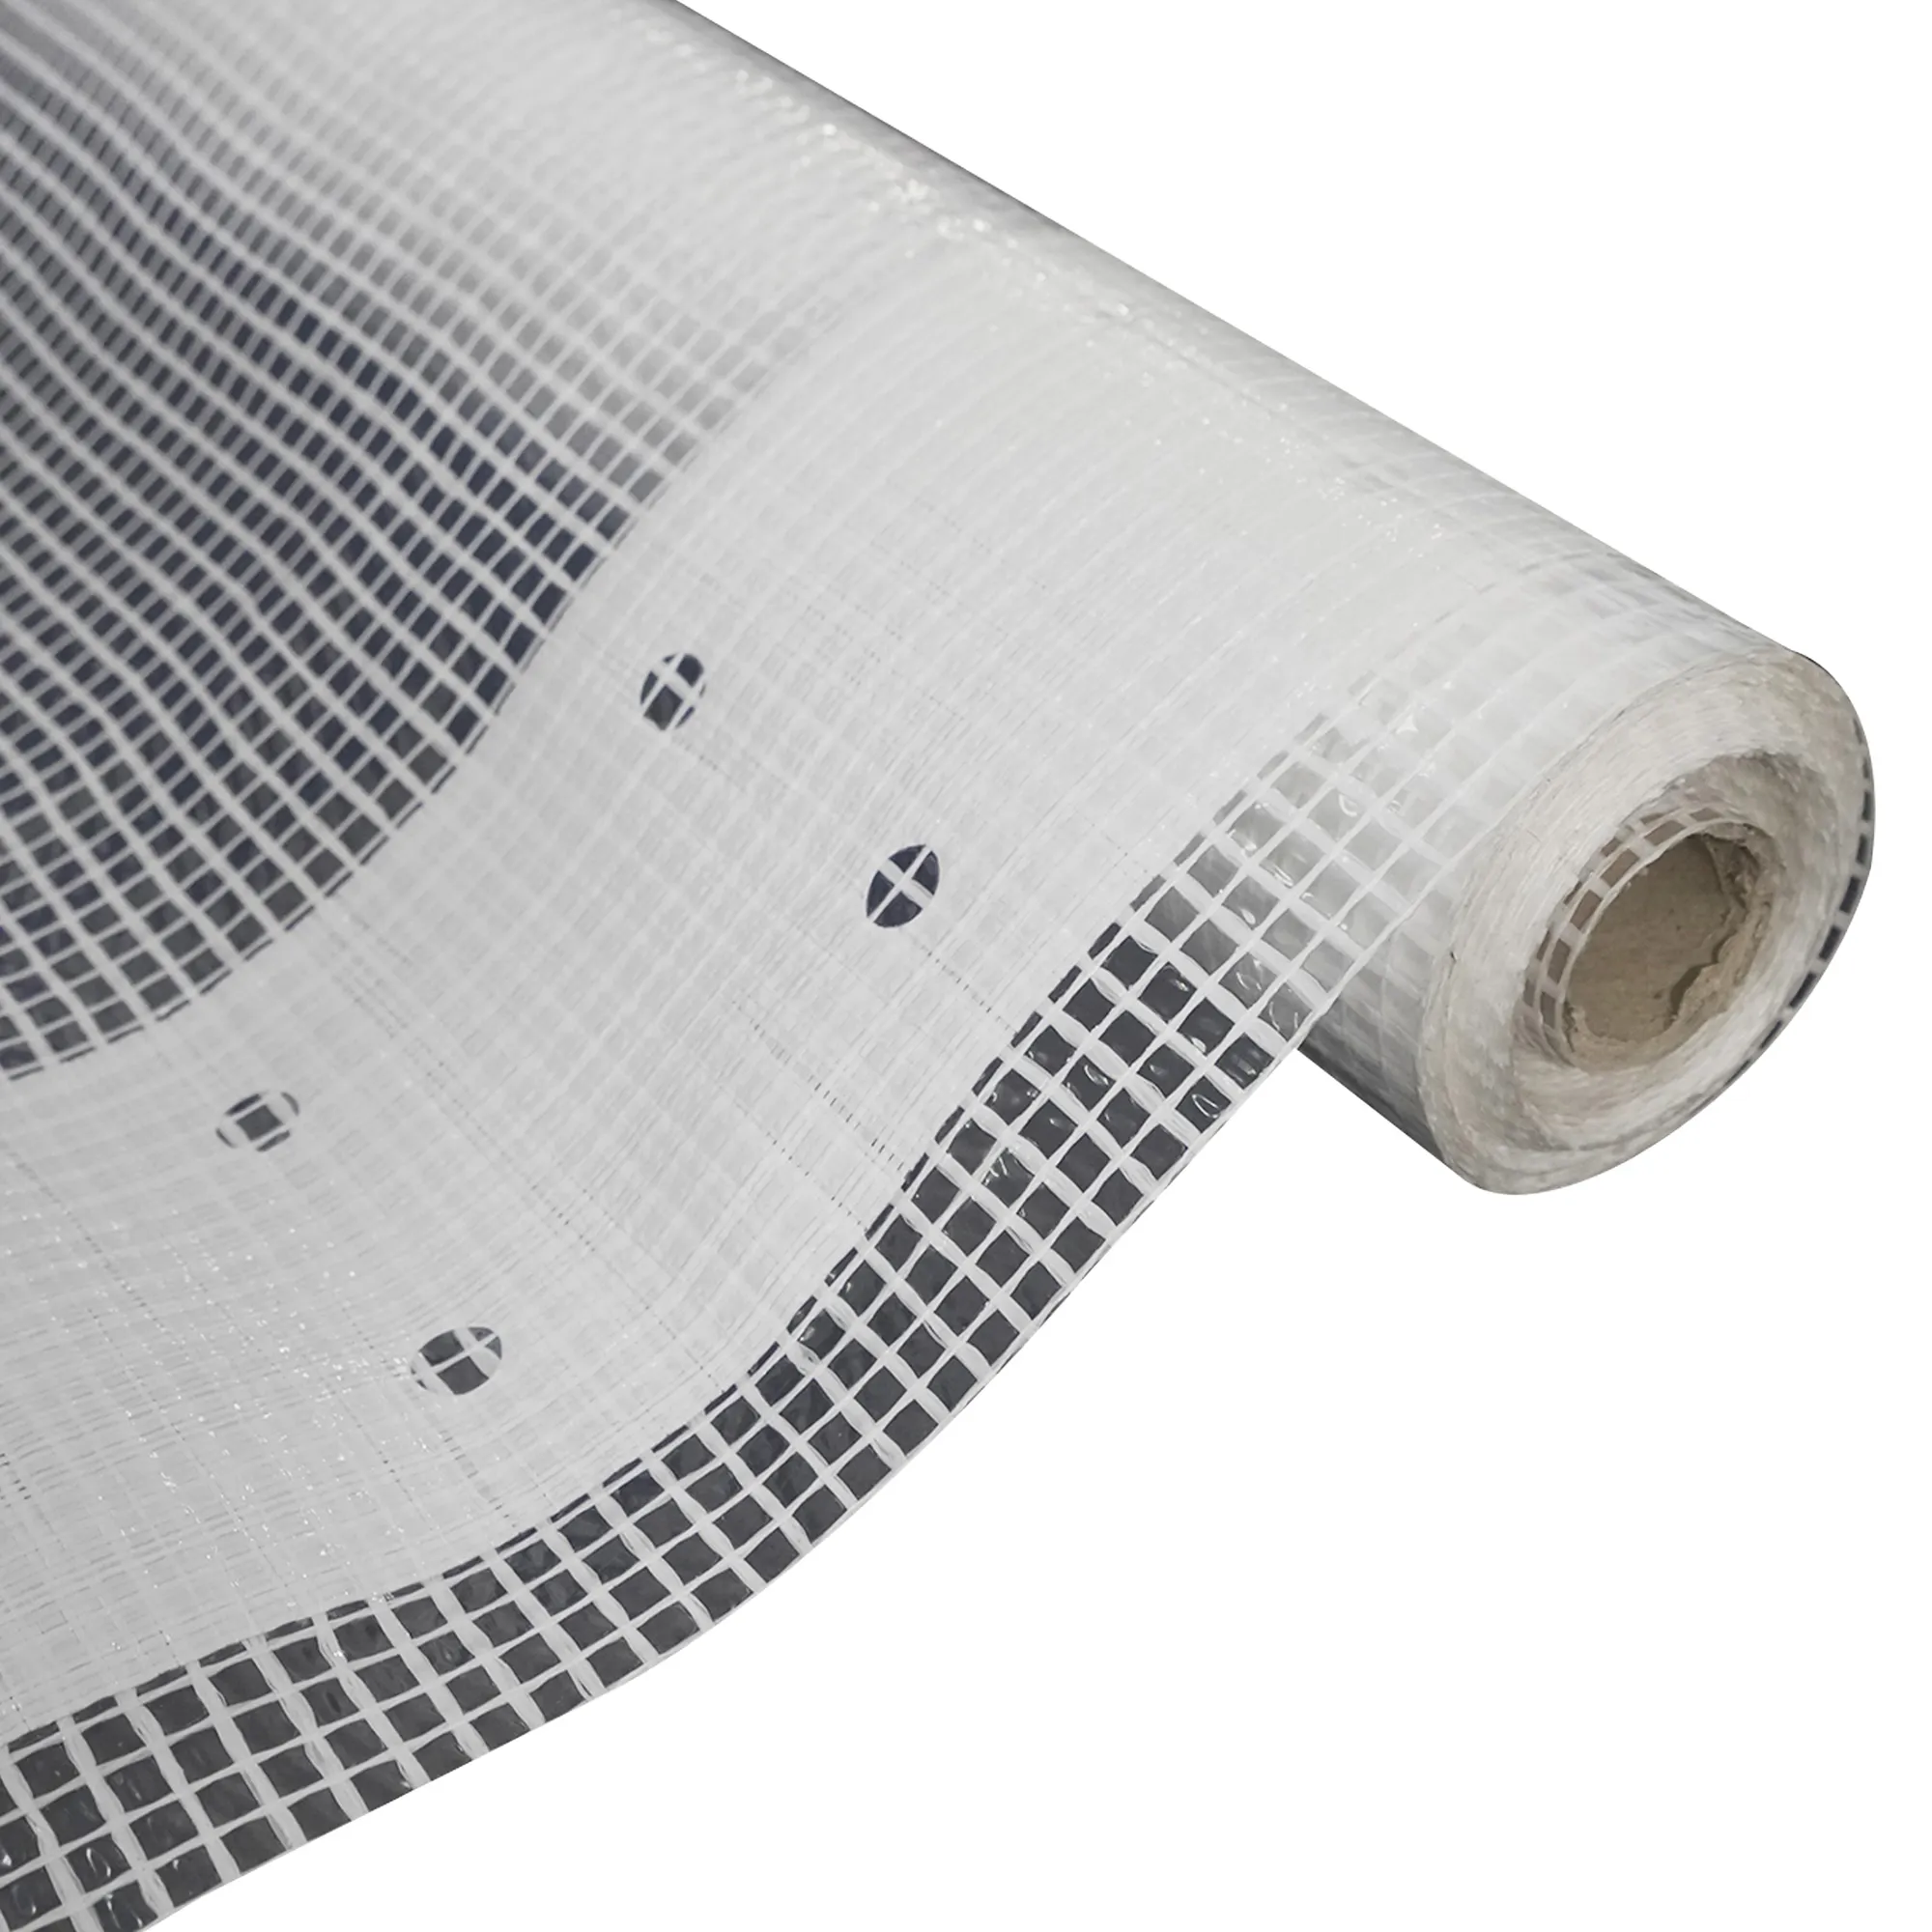 2021 Hot Selling 10*100feet Scaffolding String Reinforced Clear Poly Sheeting For Construction Covering Made In China